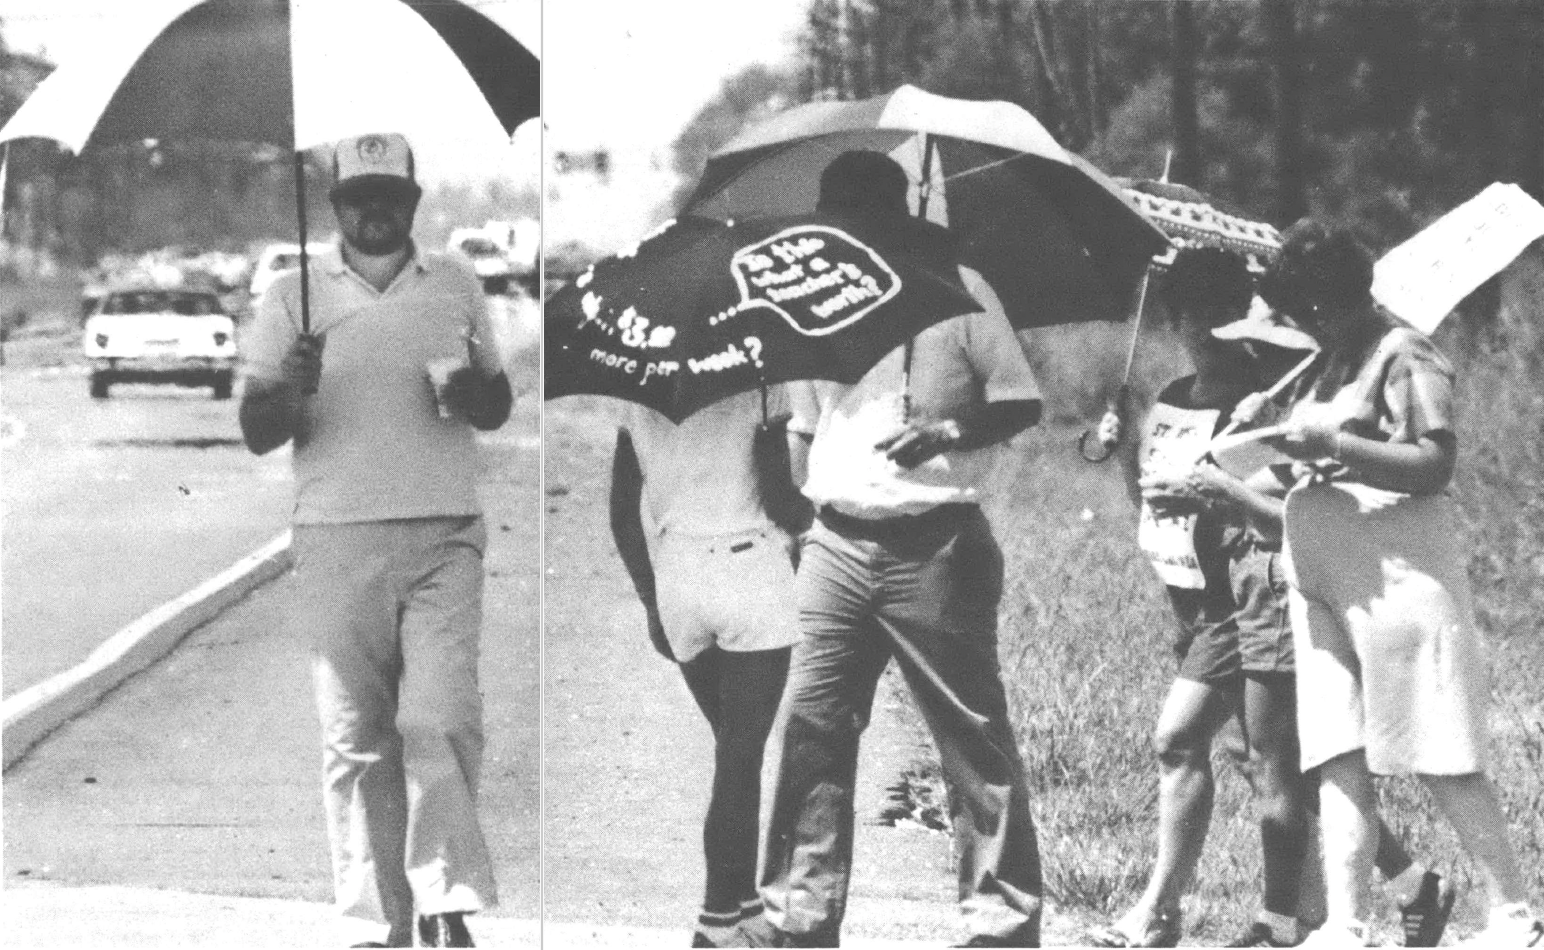 Photo of several people picketing on the side of the road with umbrellas for the sun